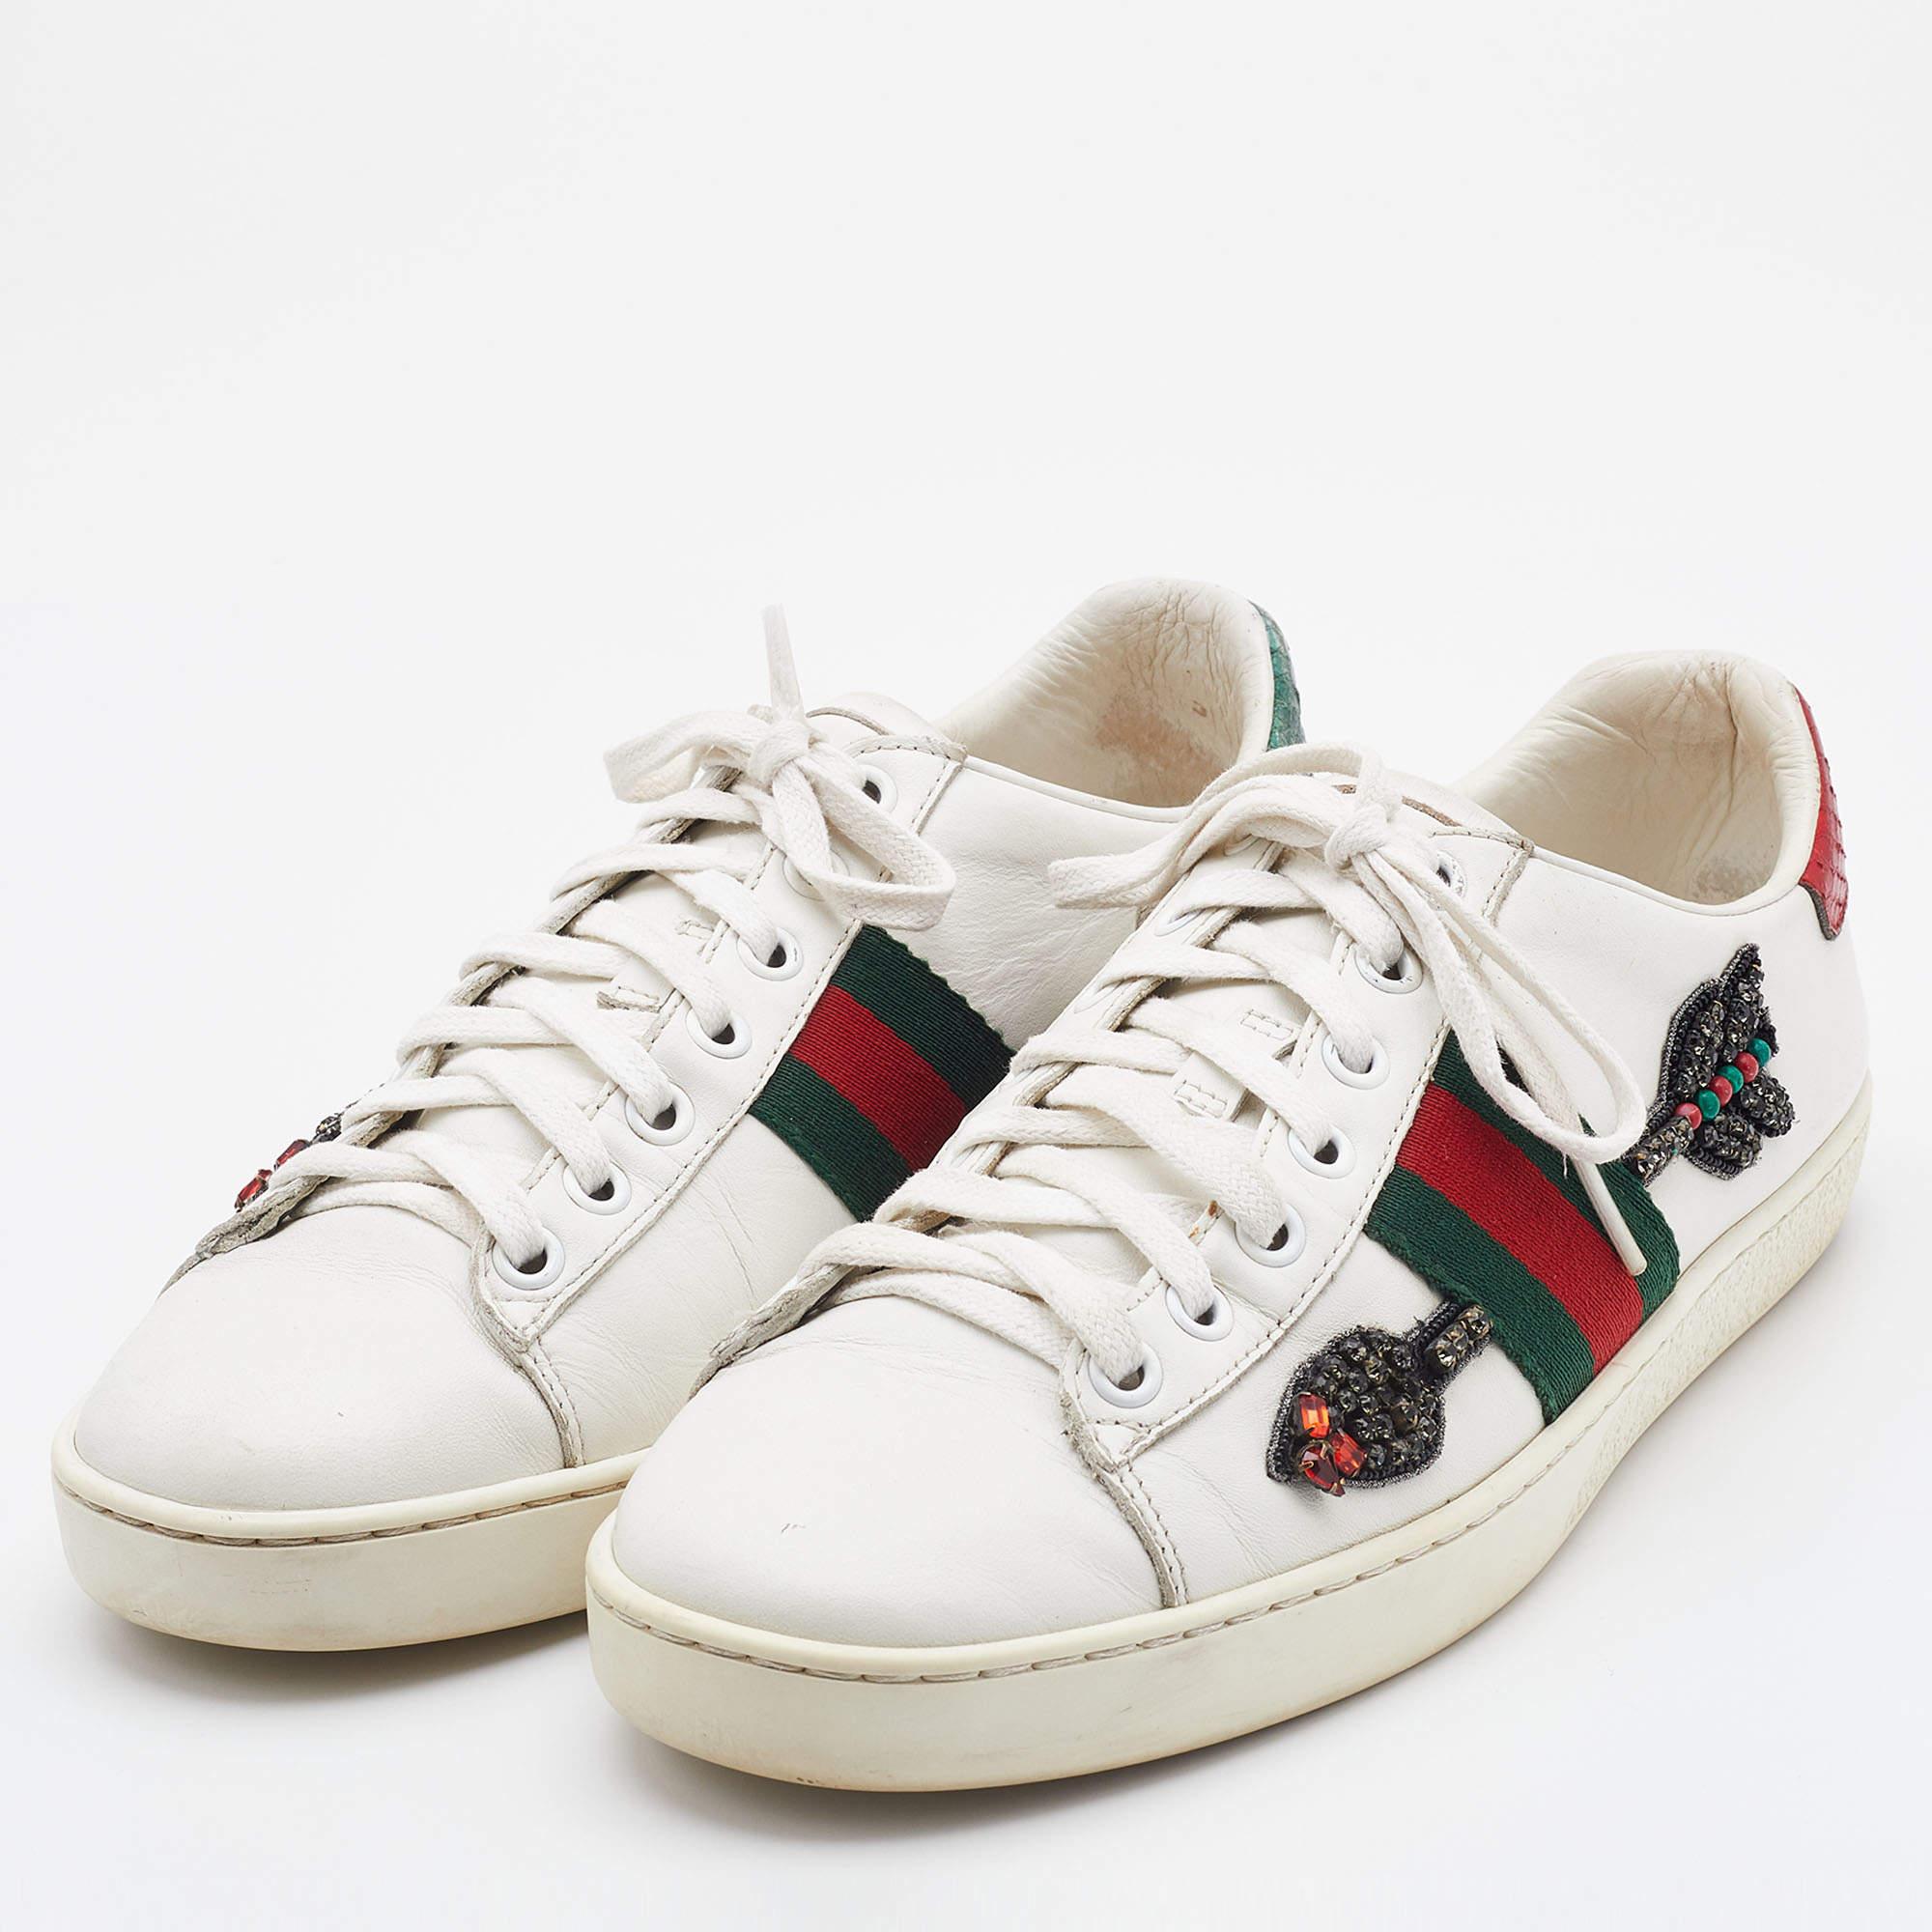 Gucci White Leather Arrow Embellished Ace Low Top Sneakers Size 37 1